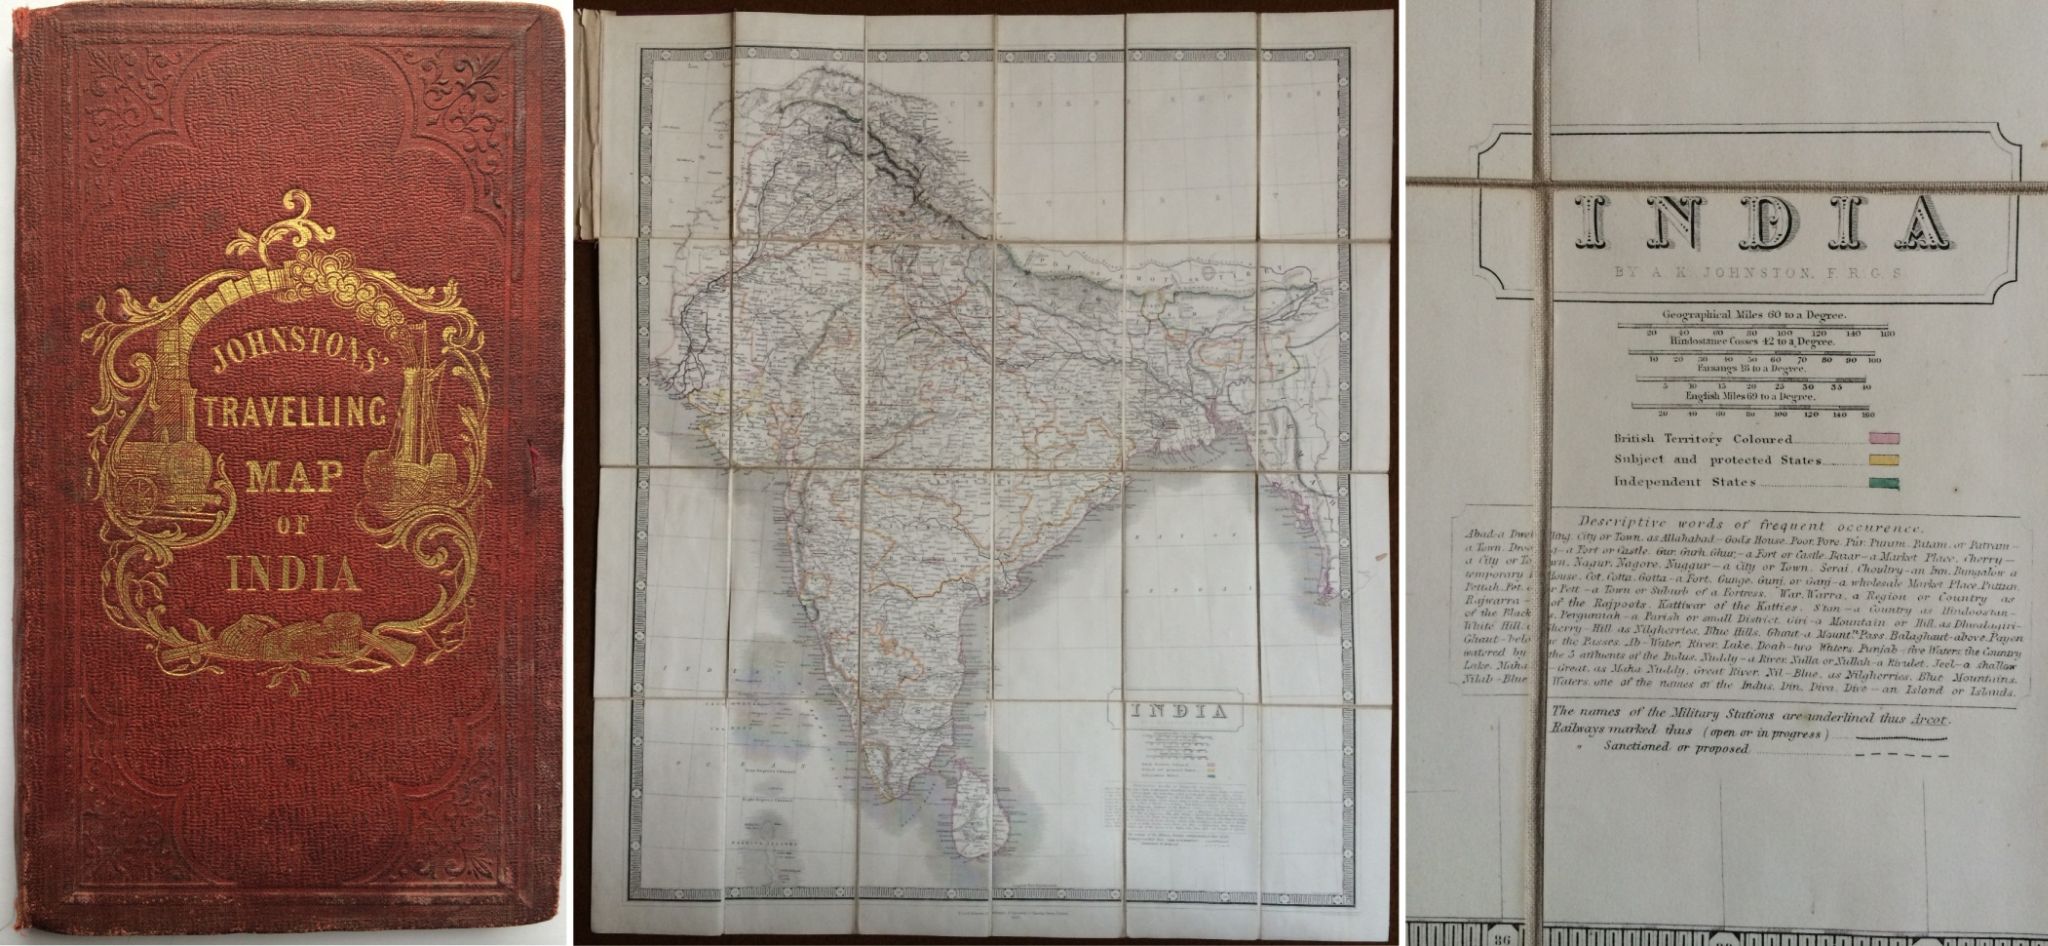 JOHNSTON`S TRAVELLING MAP OF INDIA - A large folding military map, of India by A.K. Johnstone,